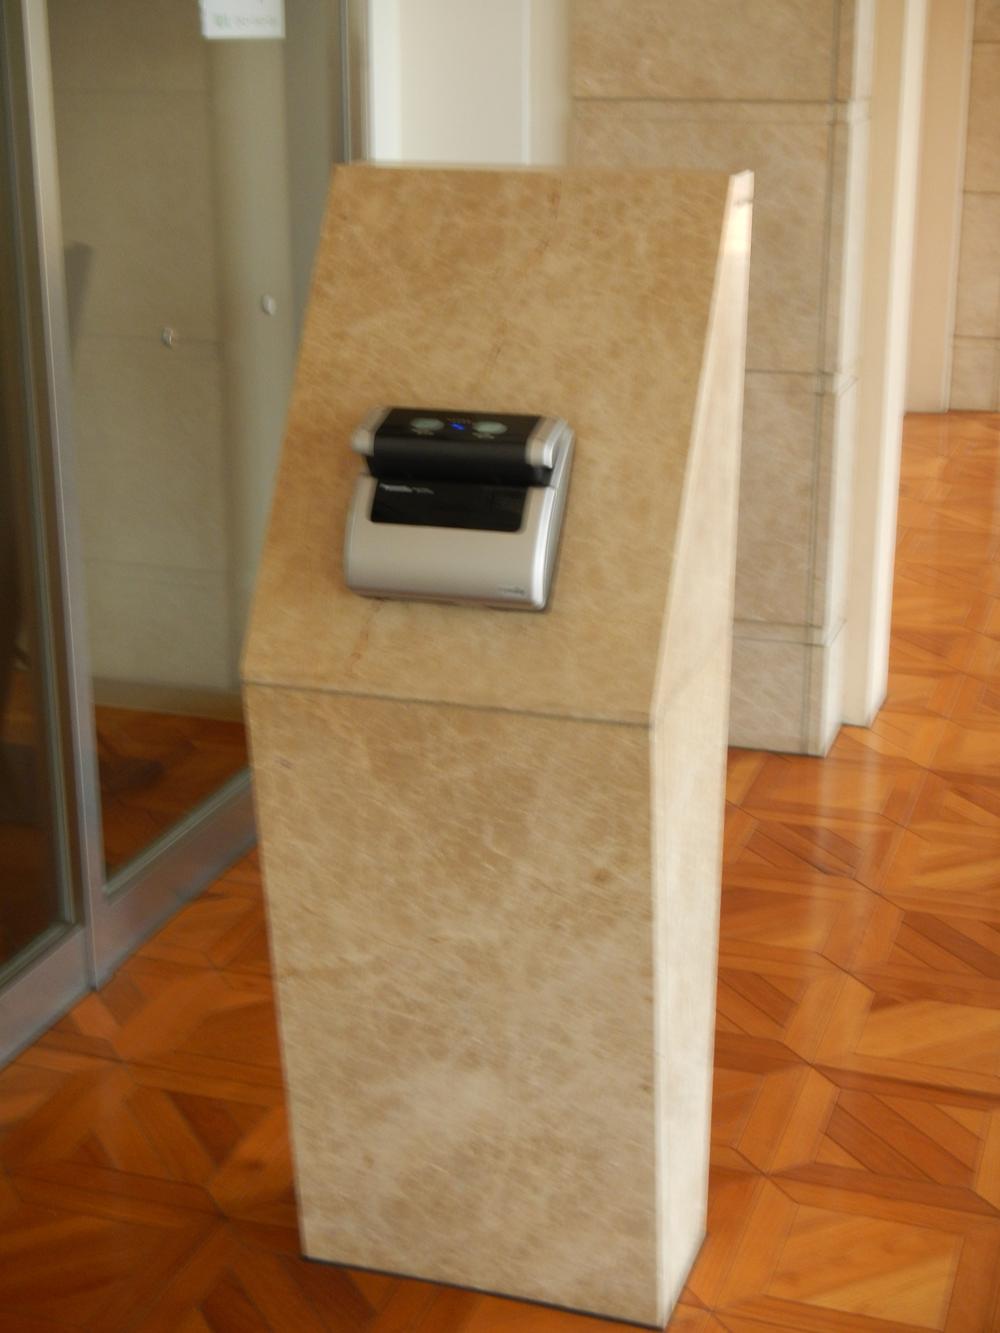 Other common areas. Iris authentication system (Entrance)